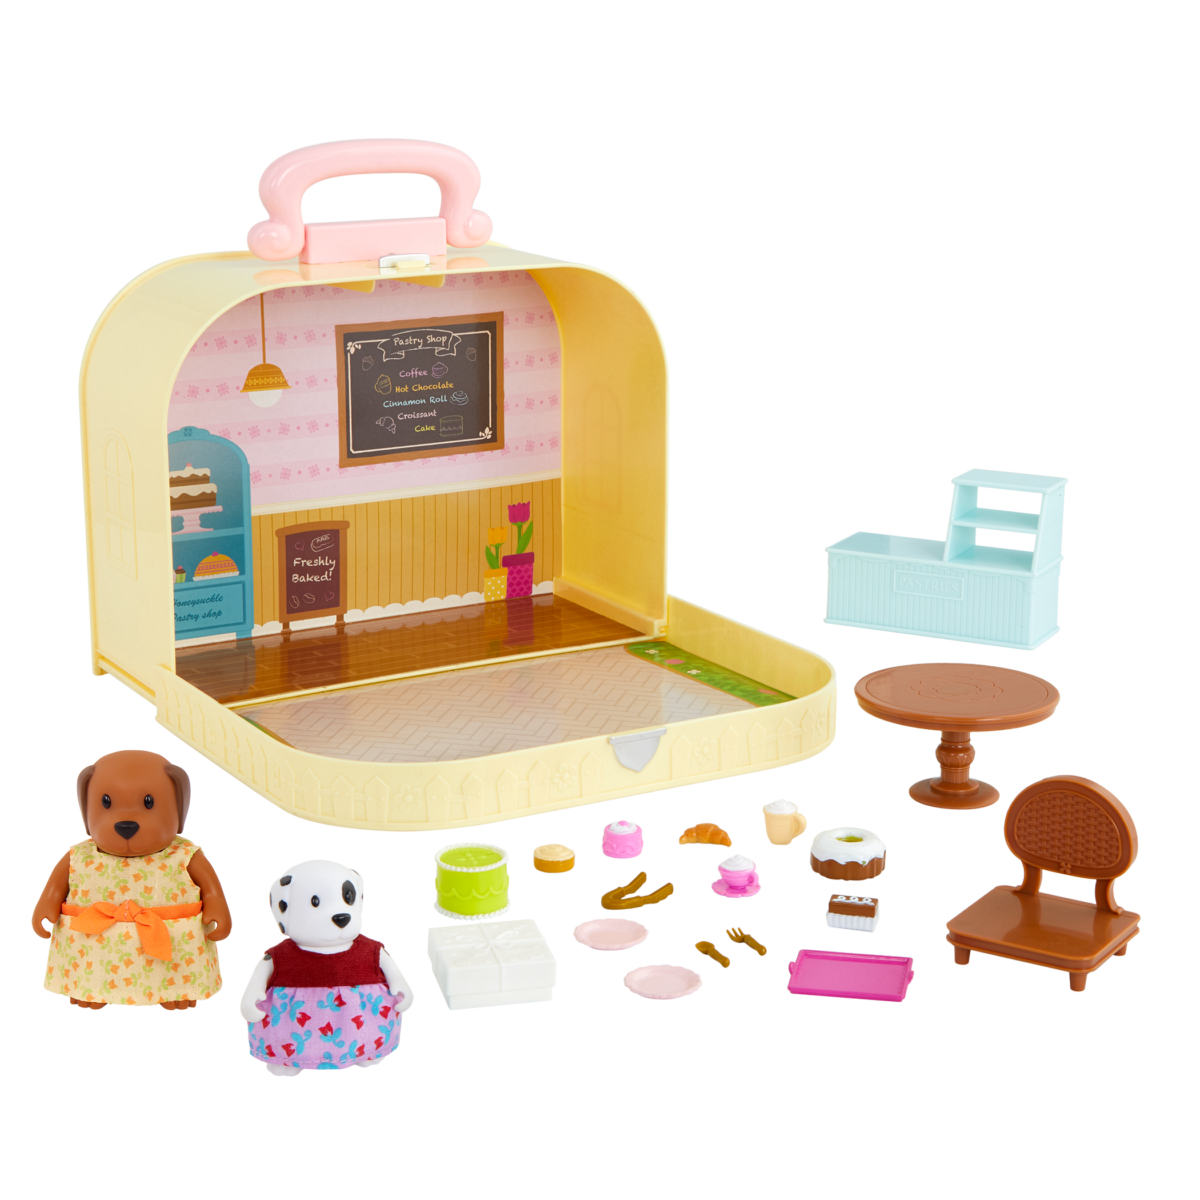 Travel Suitcase Pastry Shop Playset – Deluxe